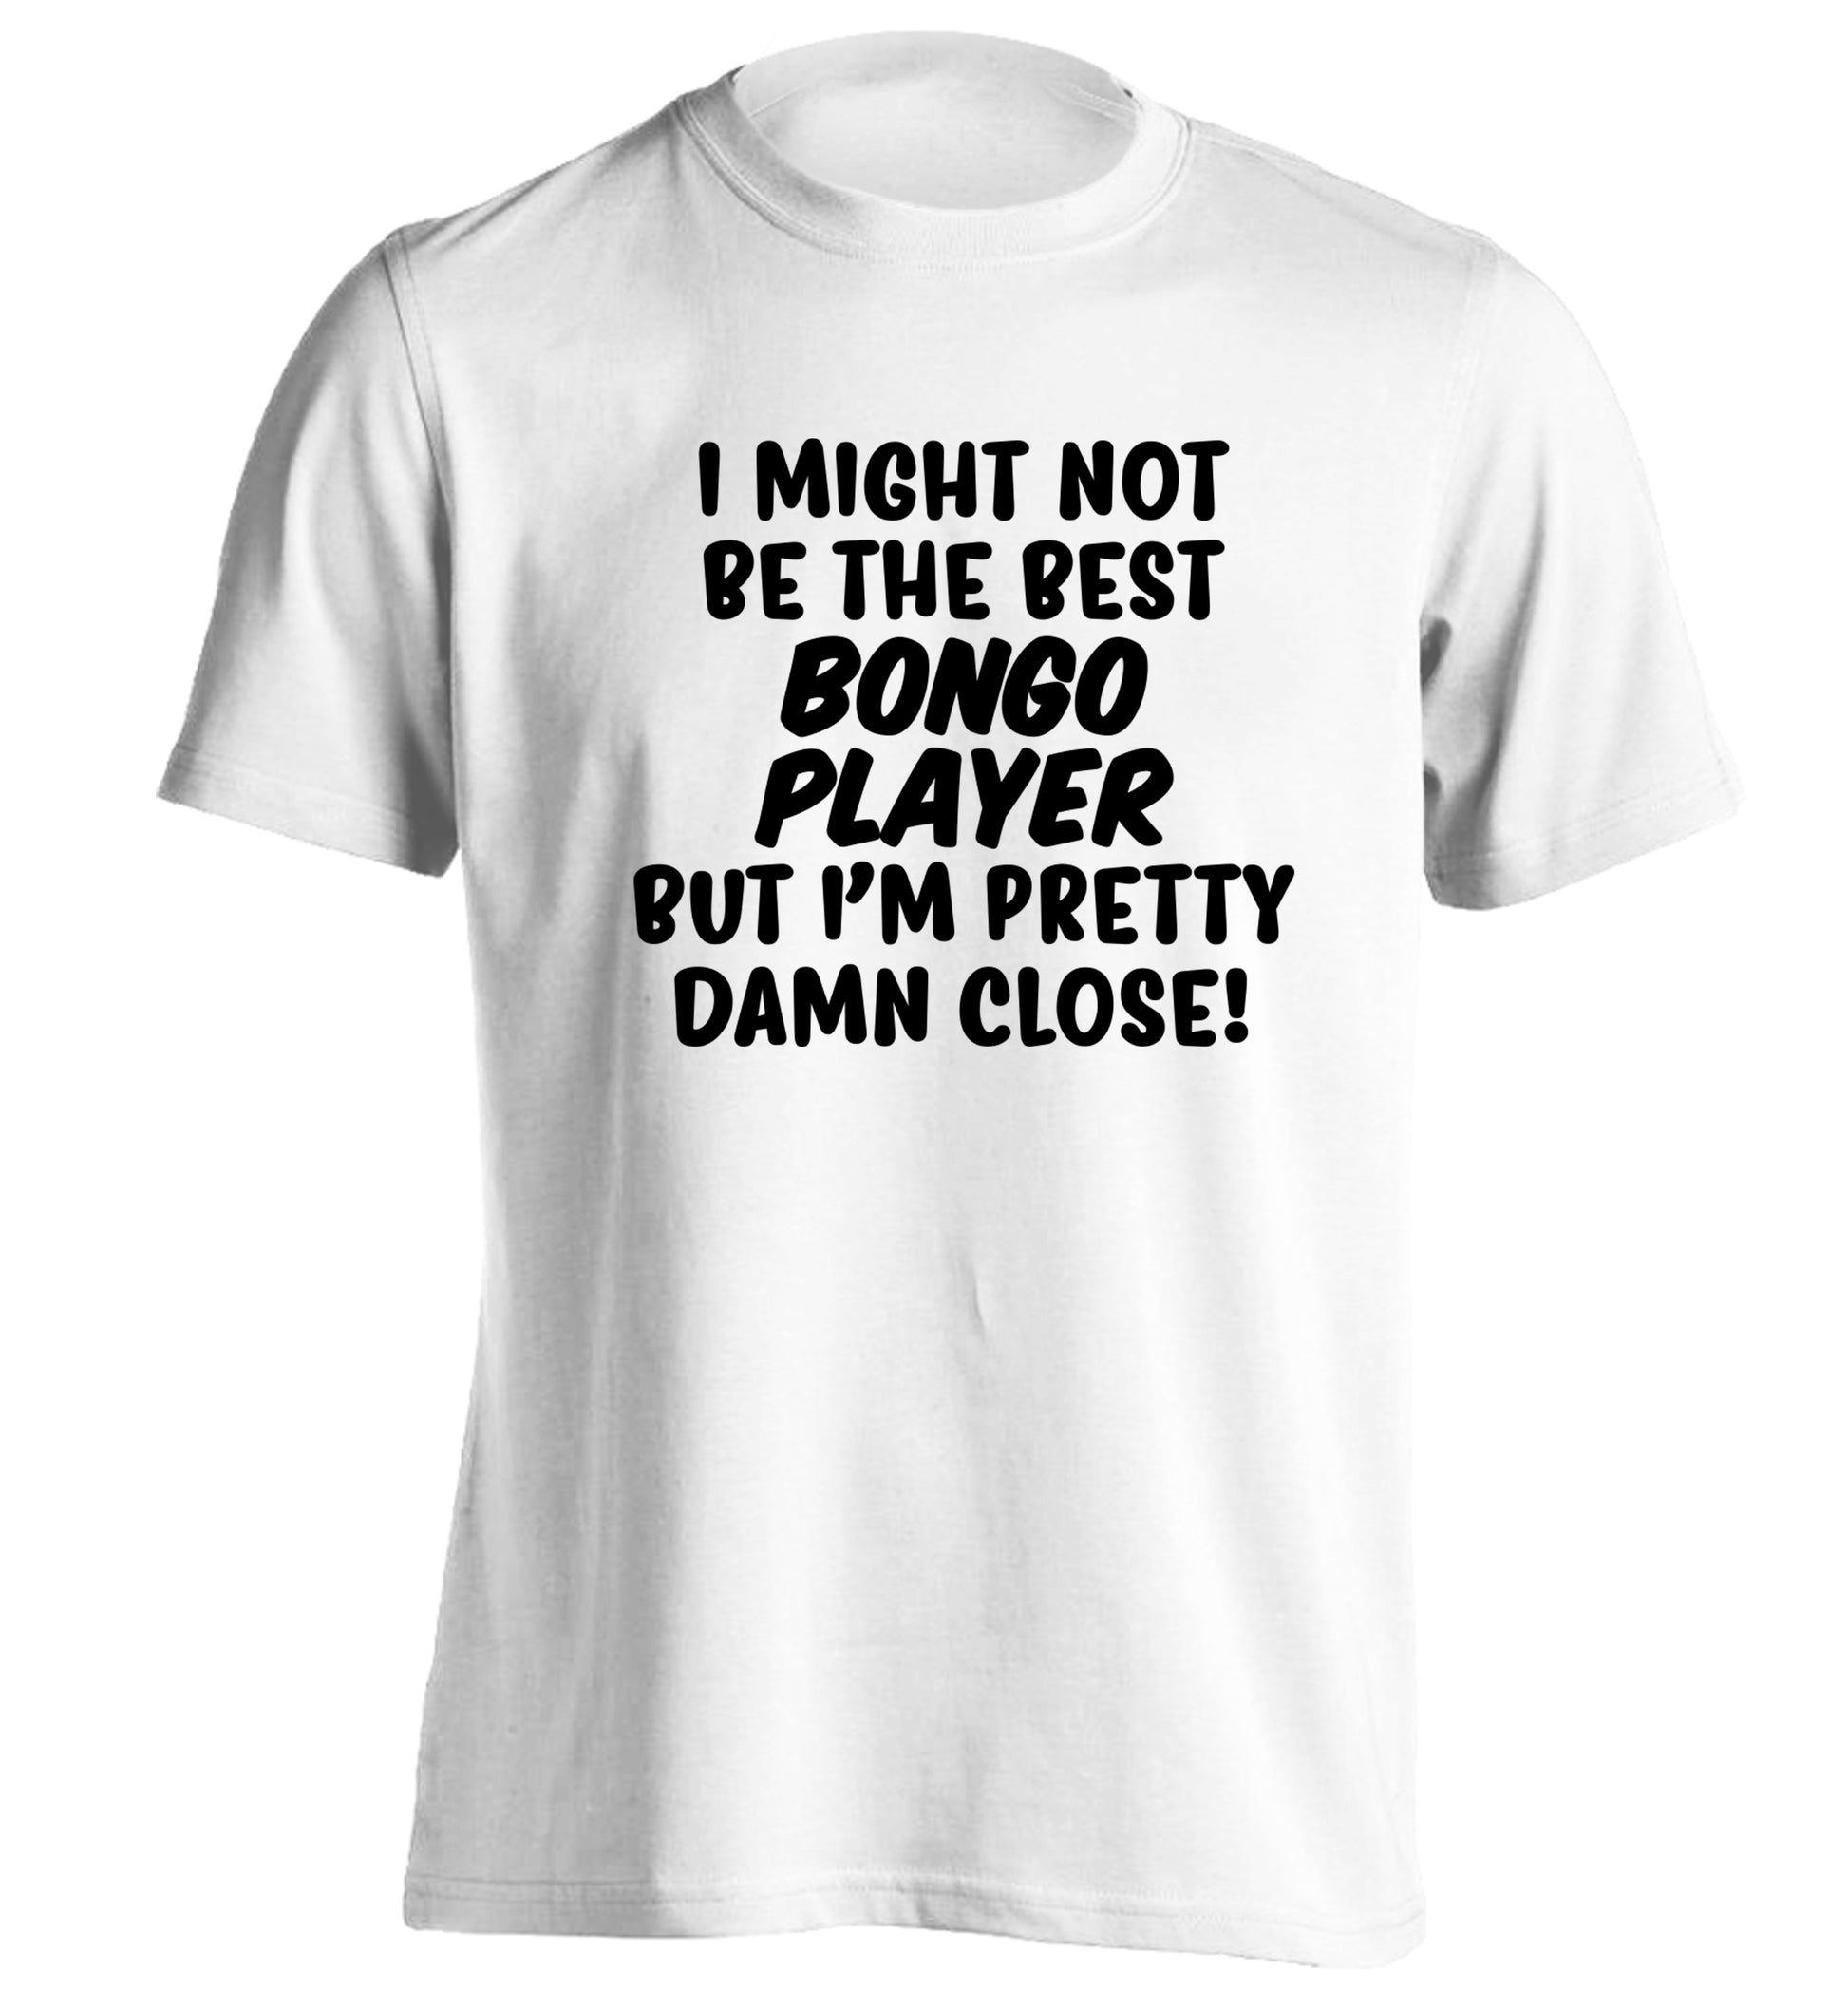 I might not be the best bongo player but I'm pretty close! adults unisexwhite Tshirt 2XL